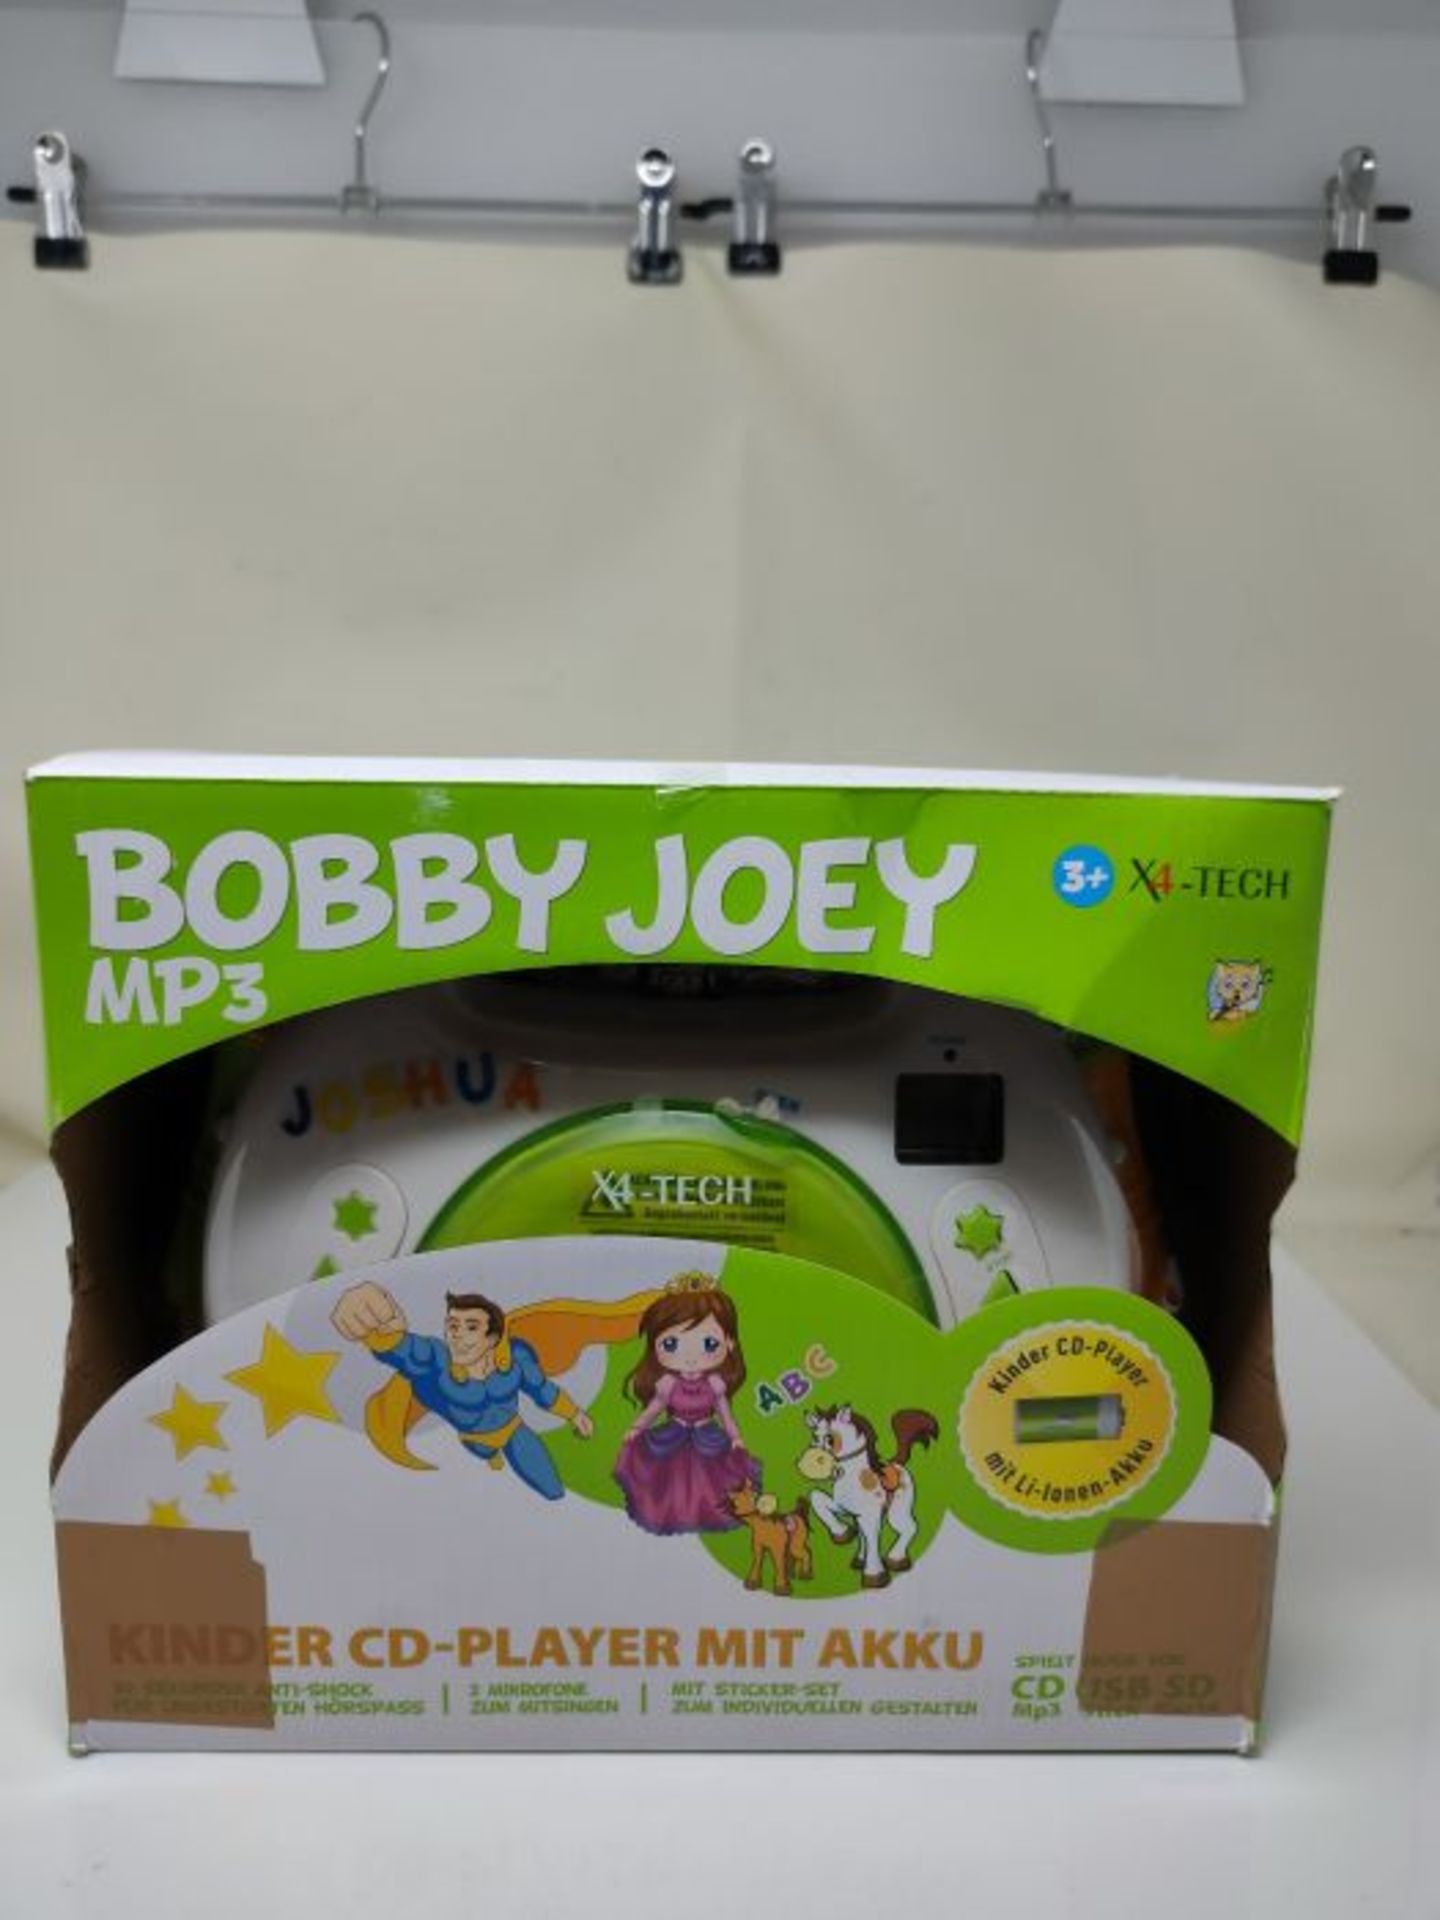 X4-TECH children's CD player Bobby Joey MP3 with battery and power supply - Image 2 of 3